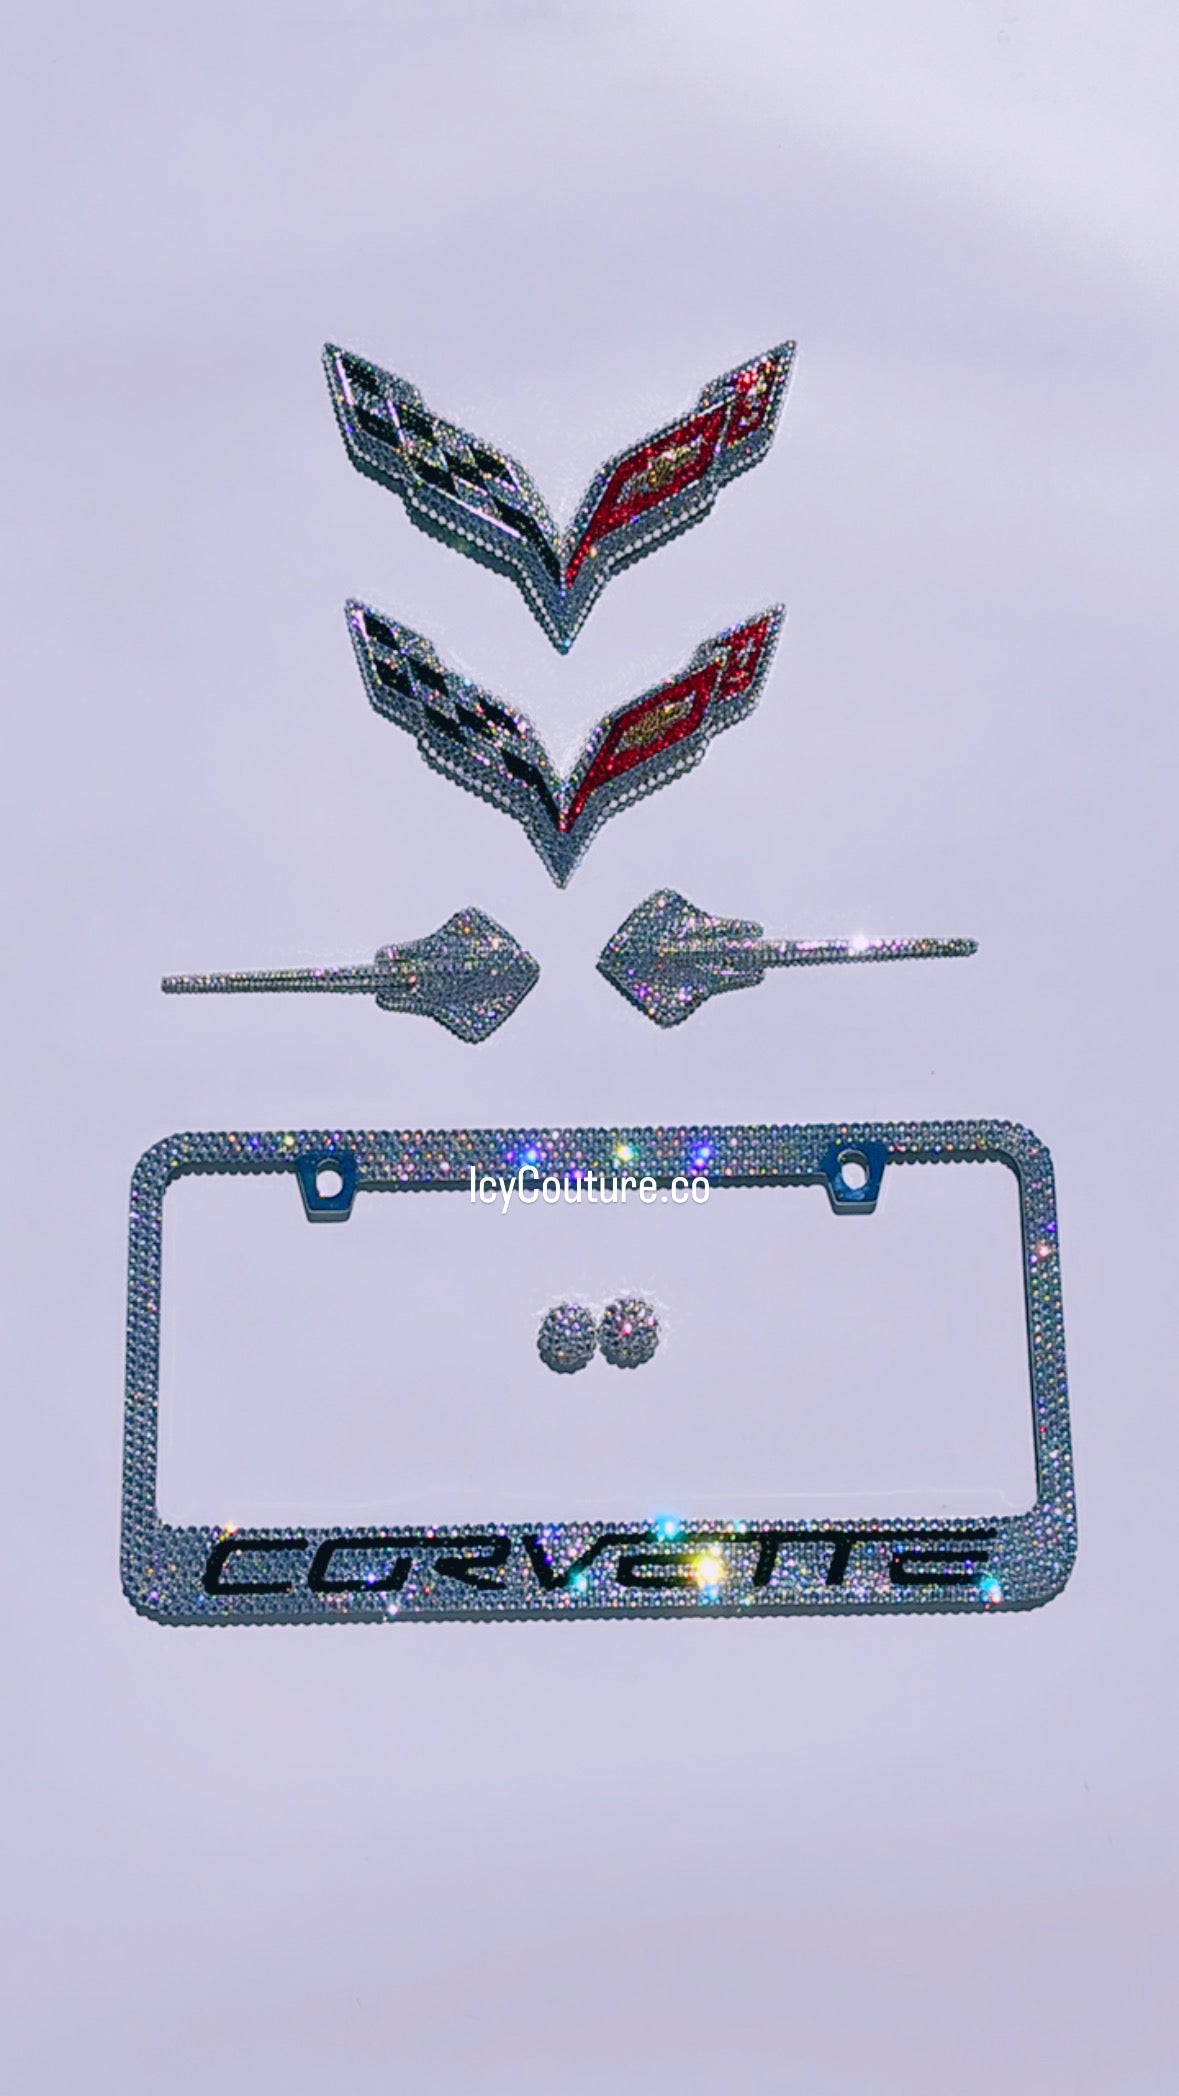 CUSTOMIZE YOUR CORVETTE - ICY Couture